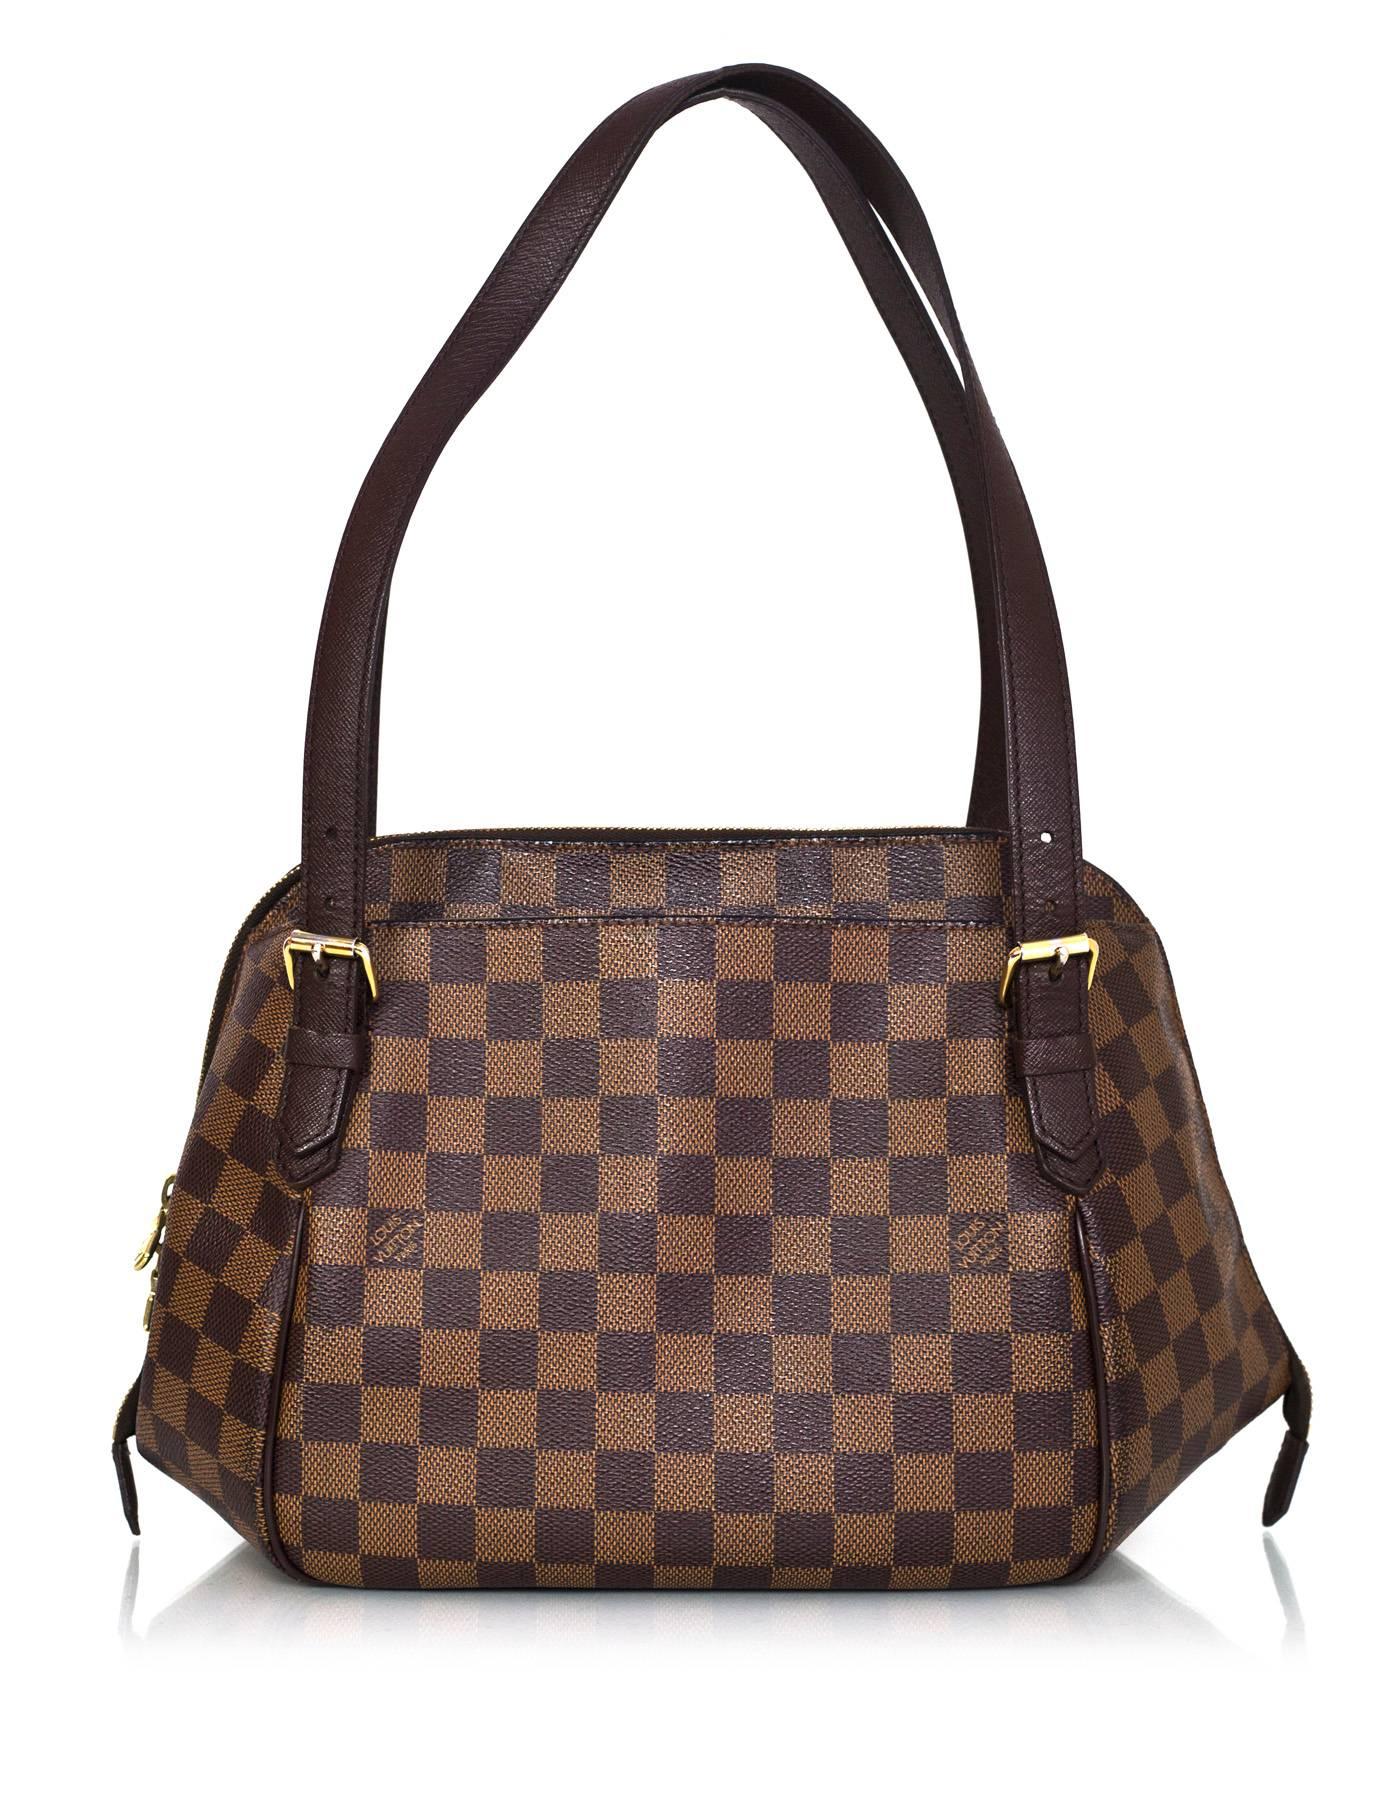 Louis Vuitton Damier Belem MM Shoulder Bag 
Features adjustable shoulder straps

Made In: France
Year of Production: 2005
Color: Brown
Hardware: Goldtone
Materials: Coated canvas
Lining: Rust colored canvas
Closure/Opening: Double zip around